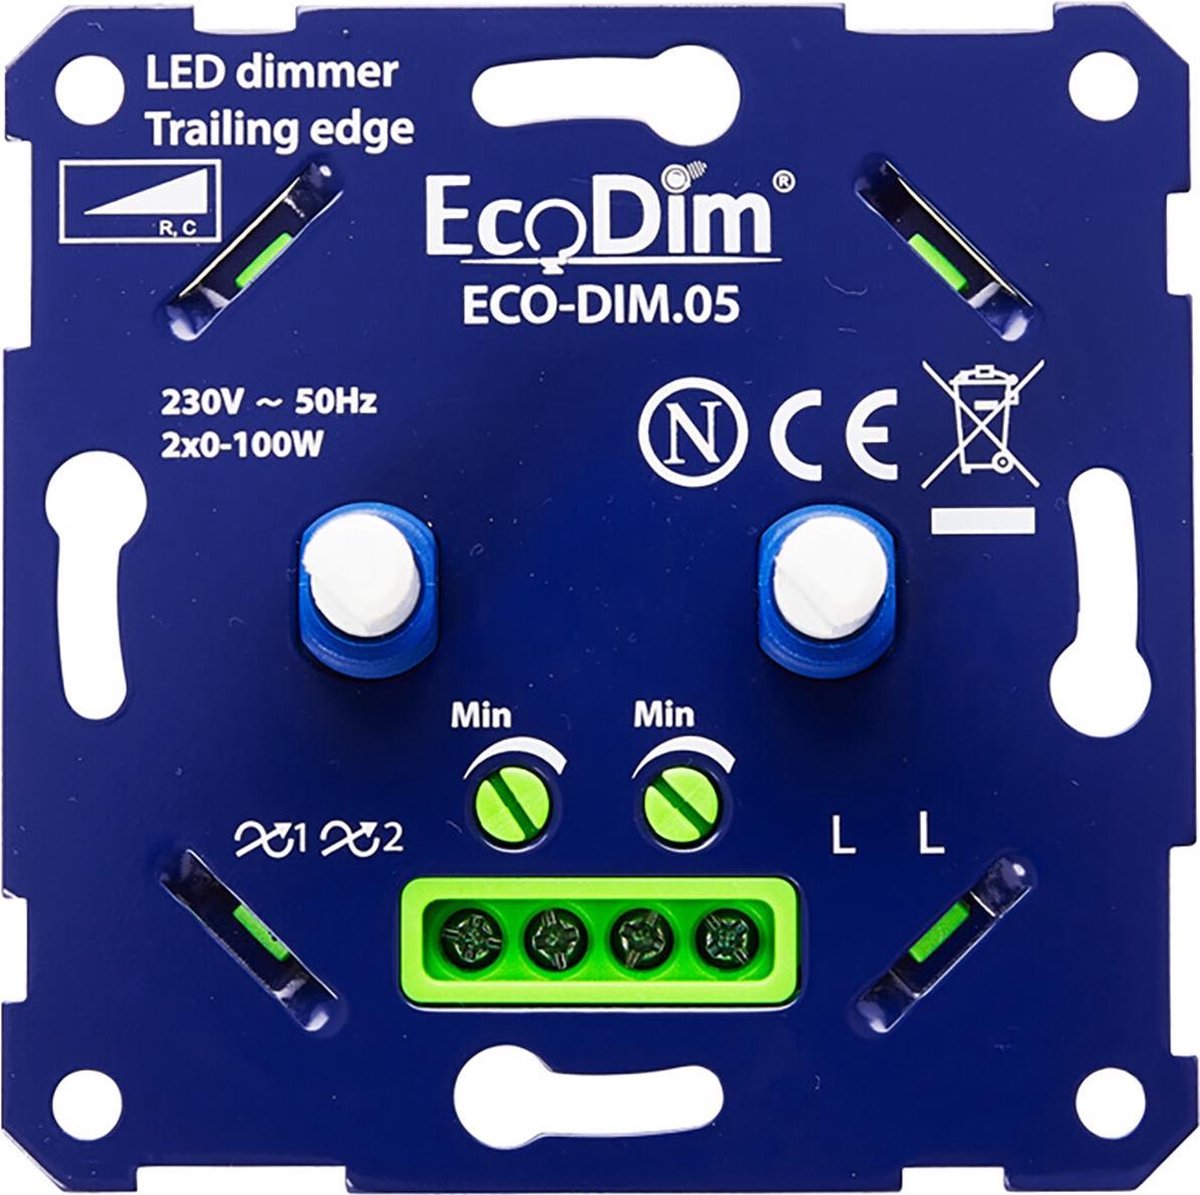 EcoDim - LED DUO Dimmer - ECO-DIM.05 - Fase Afsnijding RC - Dubbele Inbouwdimmer - Dubbel Knop - 0-100W - Quano